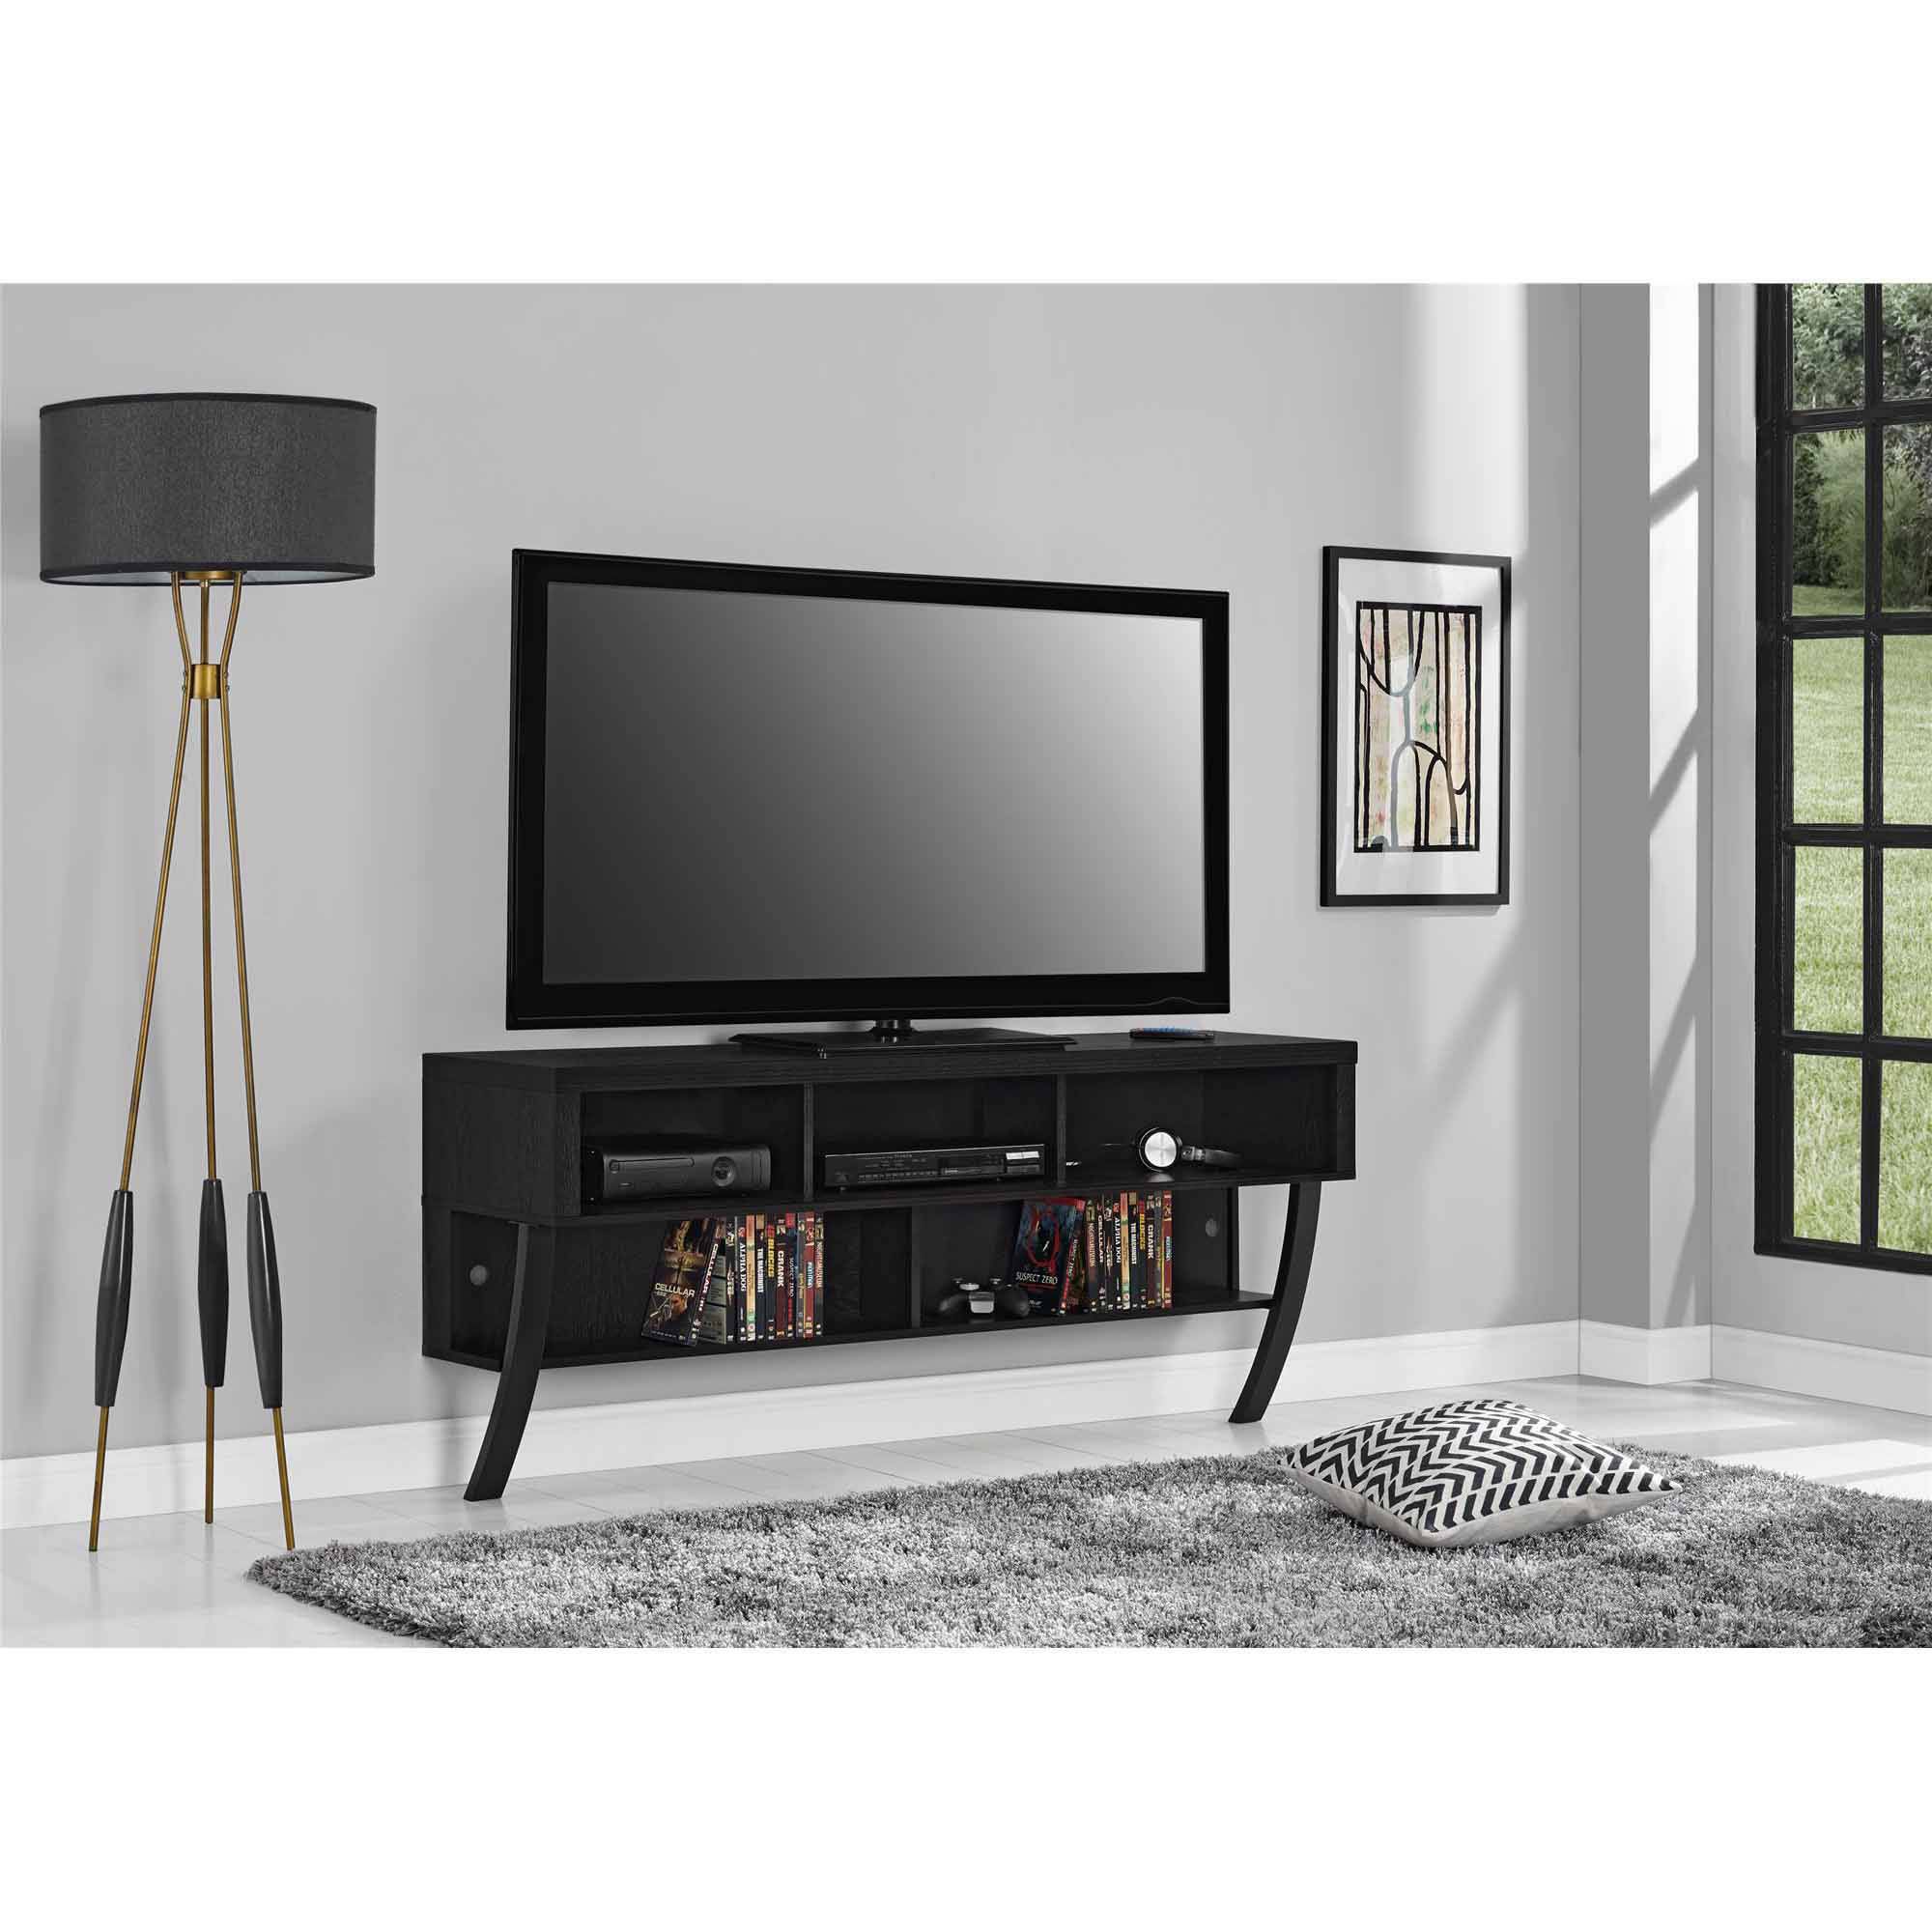 Altra Asher Wall Mounted 65" Tv Stand, Black Oak – Walmart For Opod Tv Stand Black (View 9 of 15)